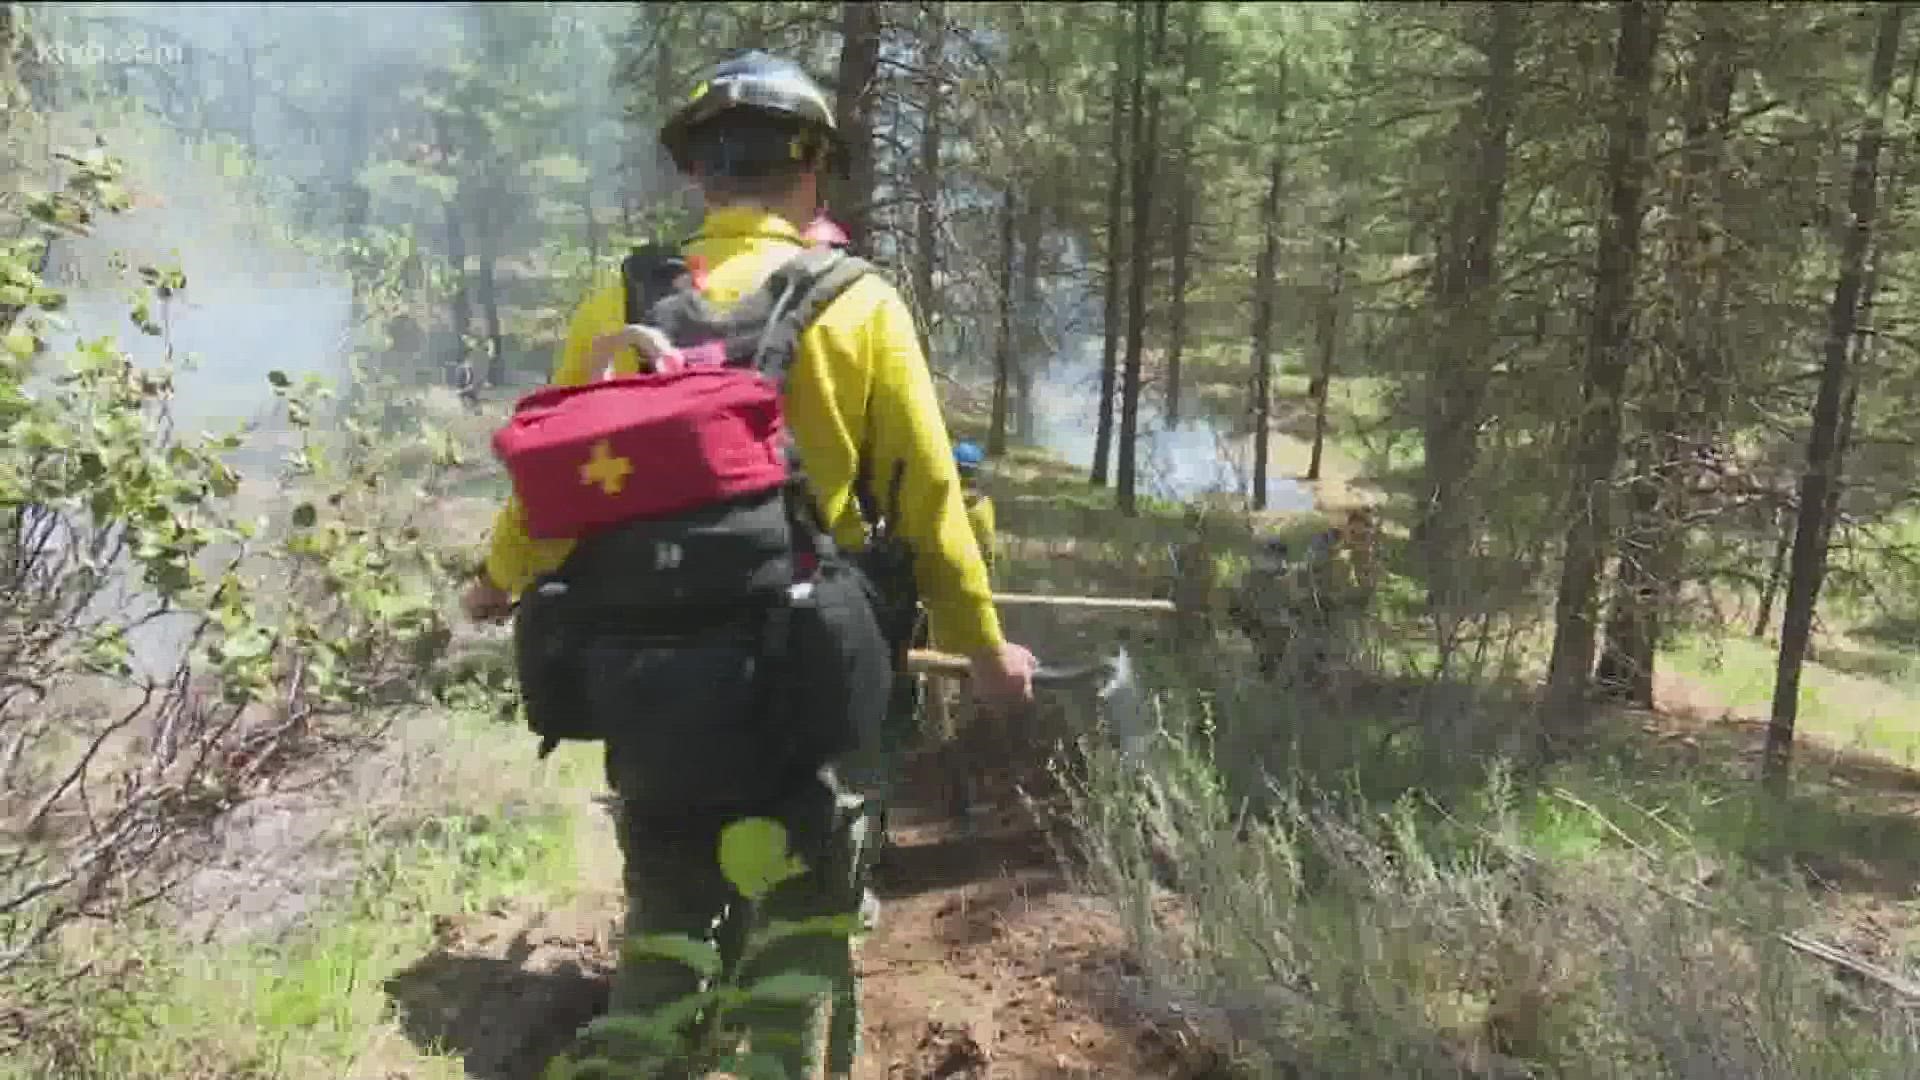 According NIFC, so far this year, more than 45,000 wildfires have burned just under six million acres.